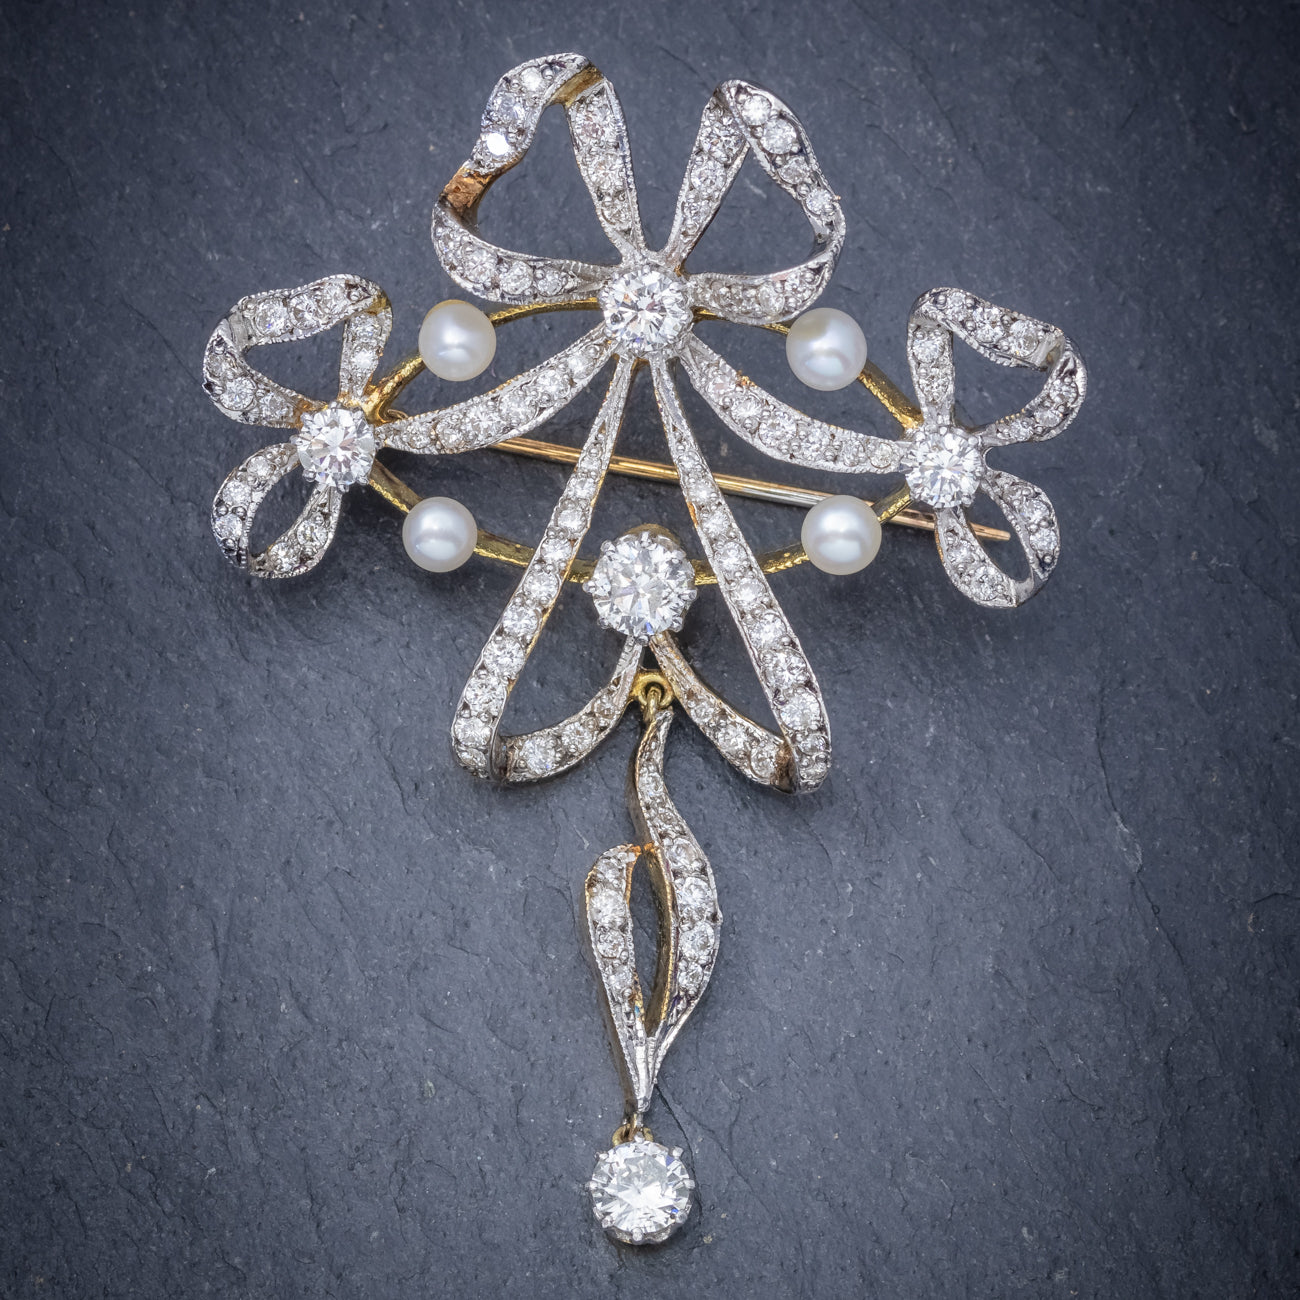 Garland 3ct Diamond Pearl Brooch 18ct Gold – Antique Jewellery Online